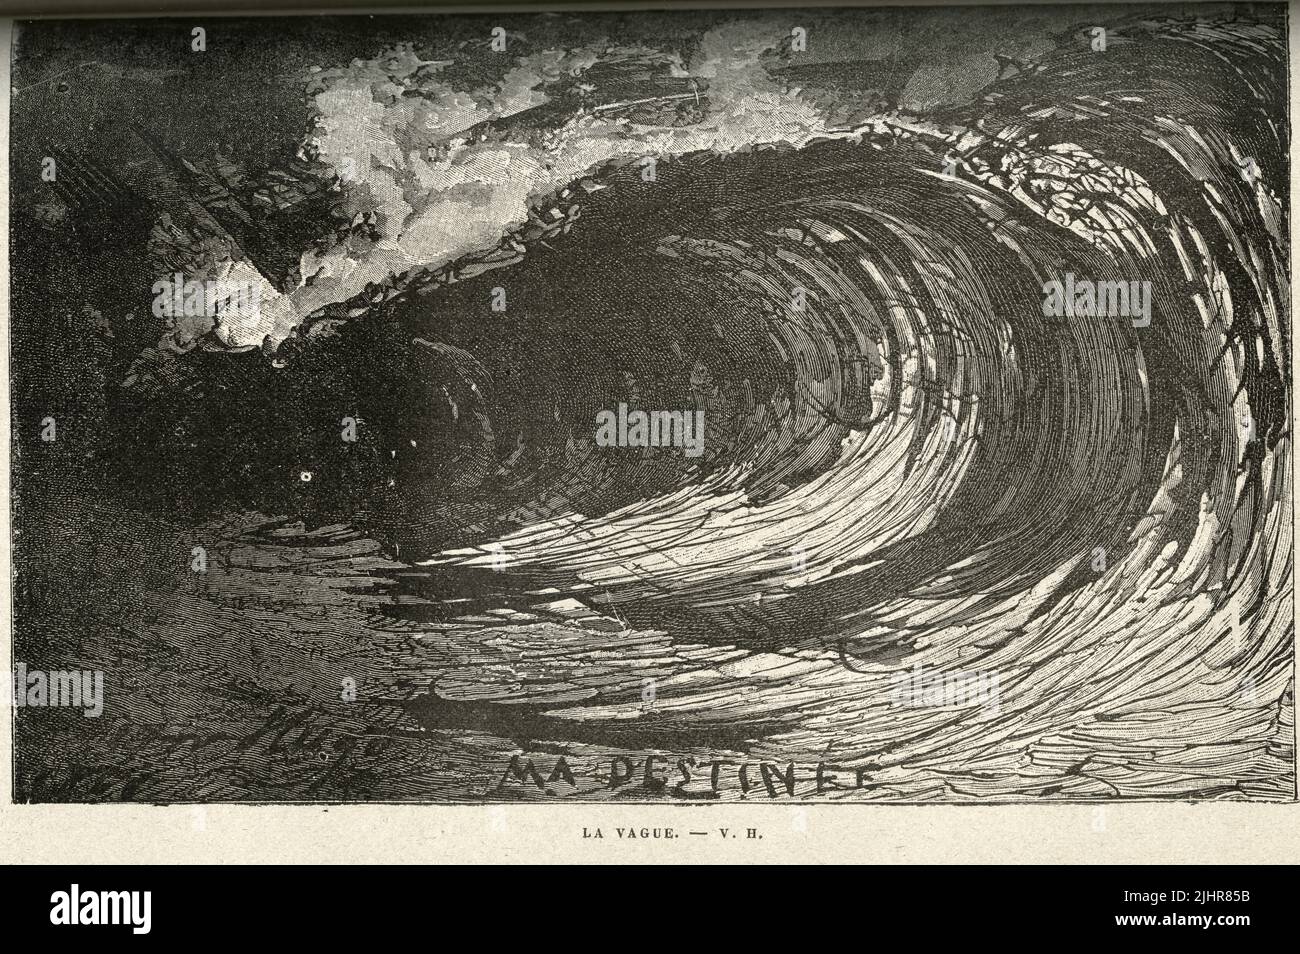 The wave. First part, Book VI, chapter I.  Illustrator: Victor Hugo. Illustration from a set of nearly 150 woodcuts published in the Volume XI of Victor Hugo's 'Oeuvres Complètes' including 'Les Travailleurs de la Mer' ('Toilers of the Sea') - written in 1866. Book published in 1906 by the Société d'éditions Littéraires et Artistiques, Librairie Paul Ollendorff. Stock Photo